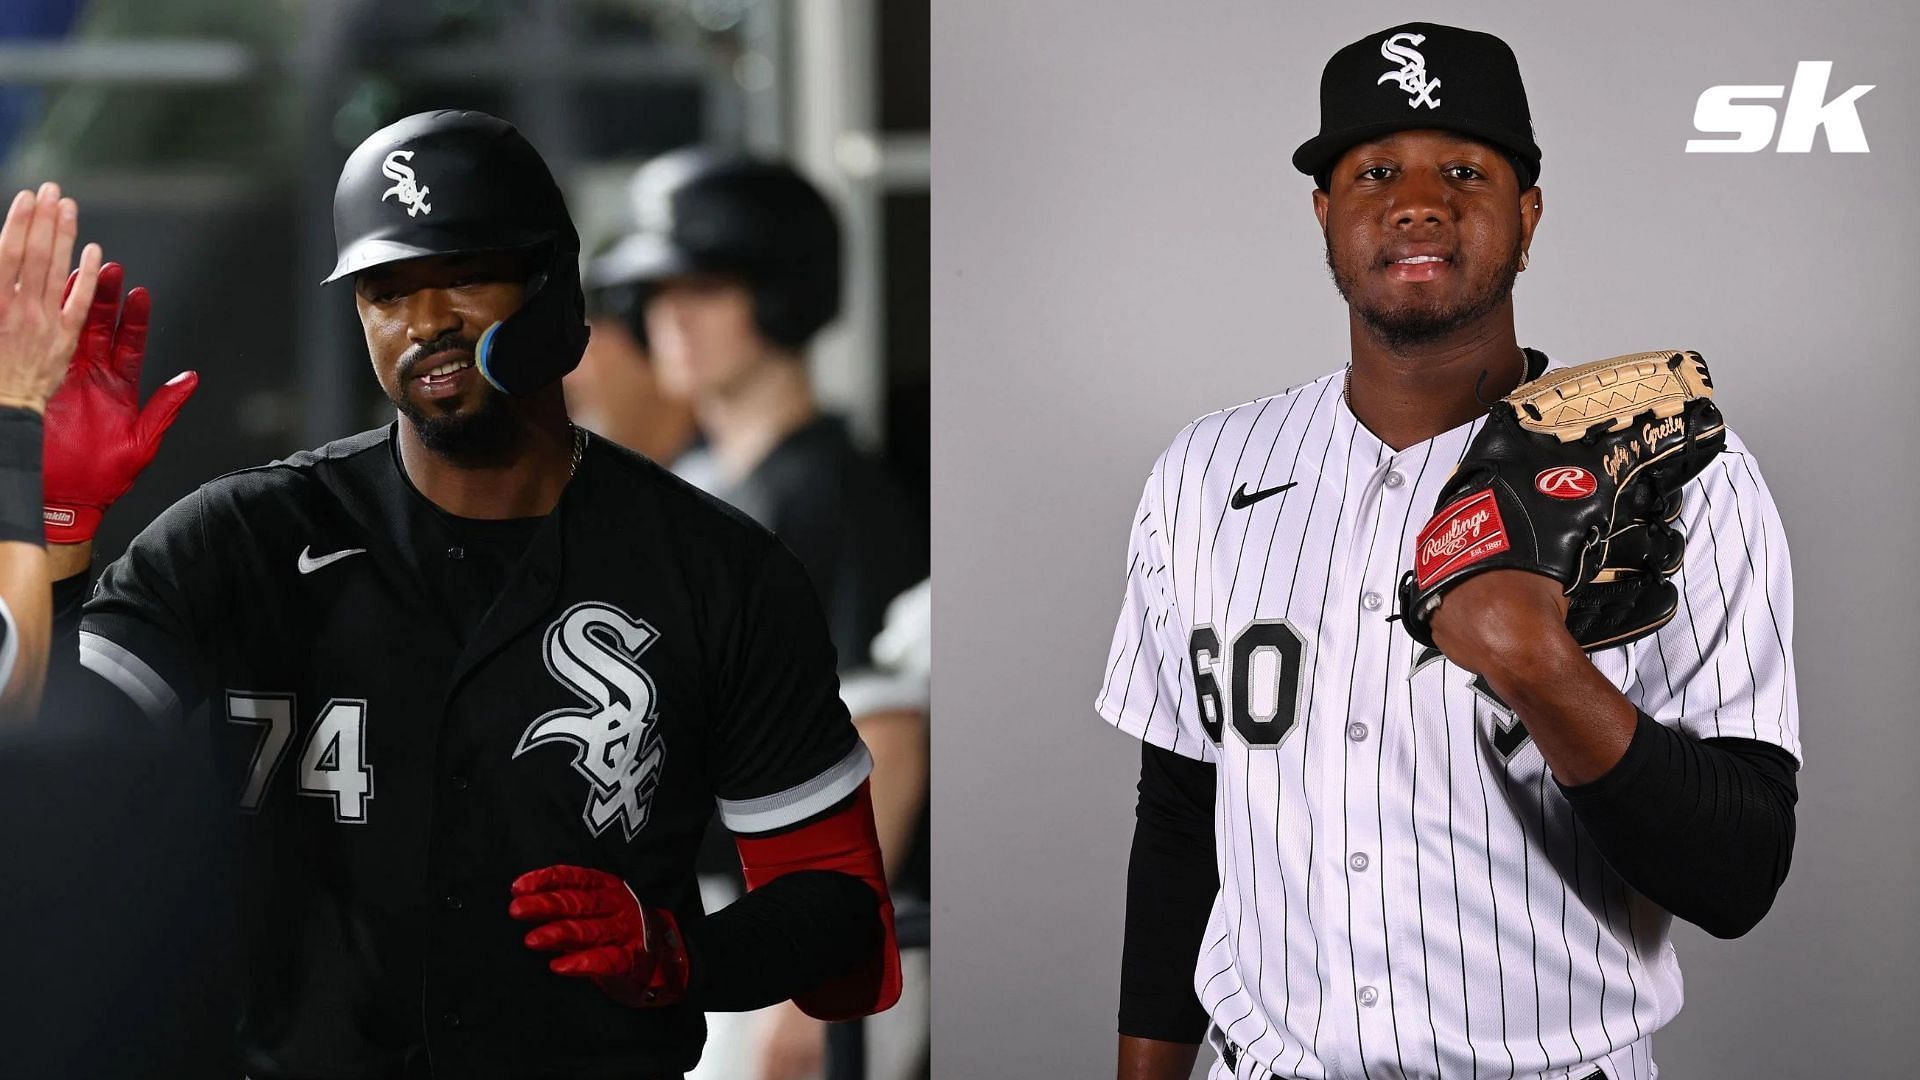 Eloy Jimenez and Gregory Santos are two Chicago White Sox players who could provide managers with value in 2024 MLB fantasy drafts